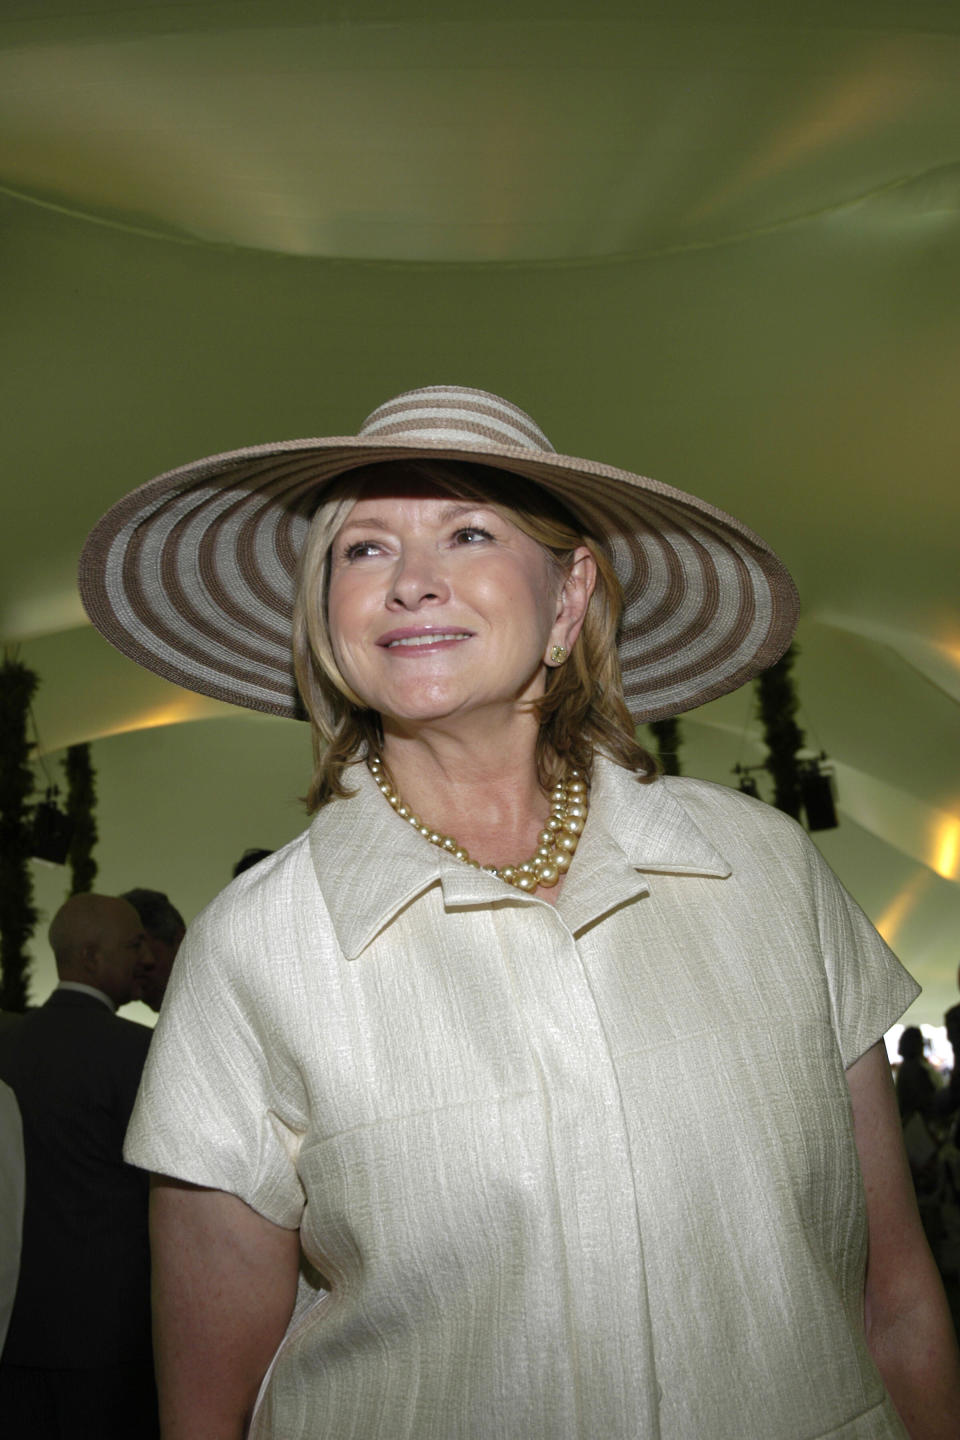 Stewart at a luncheon in New York City on May 7, 2008.